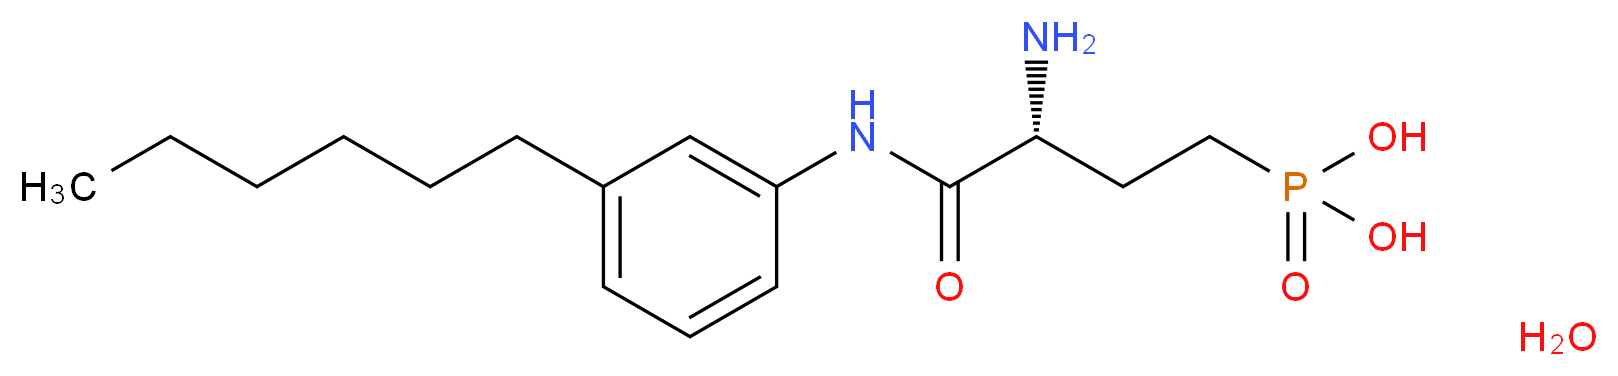 909725-61-7(anhydrous) molecular structure